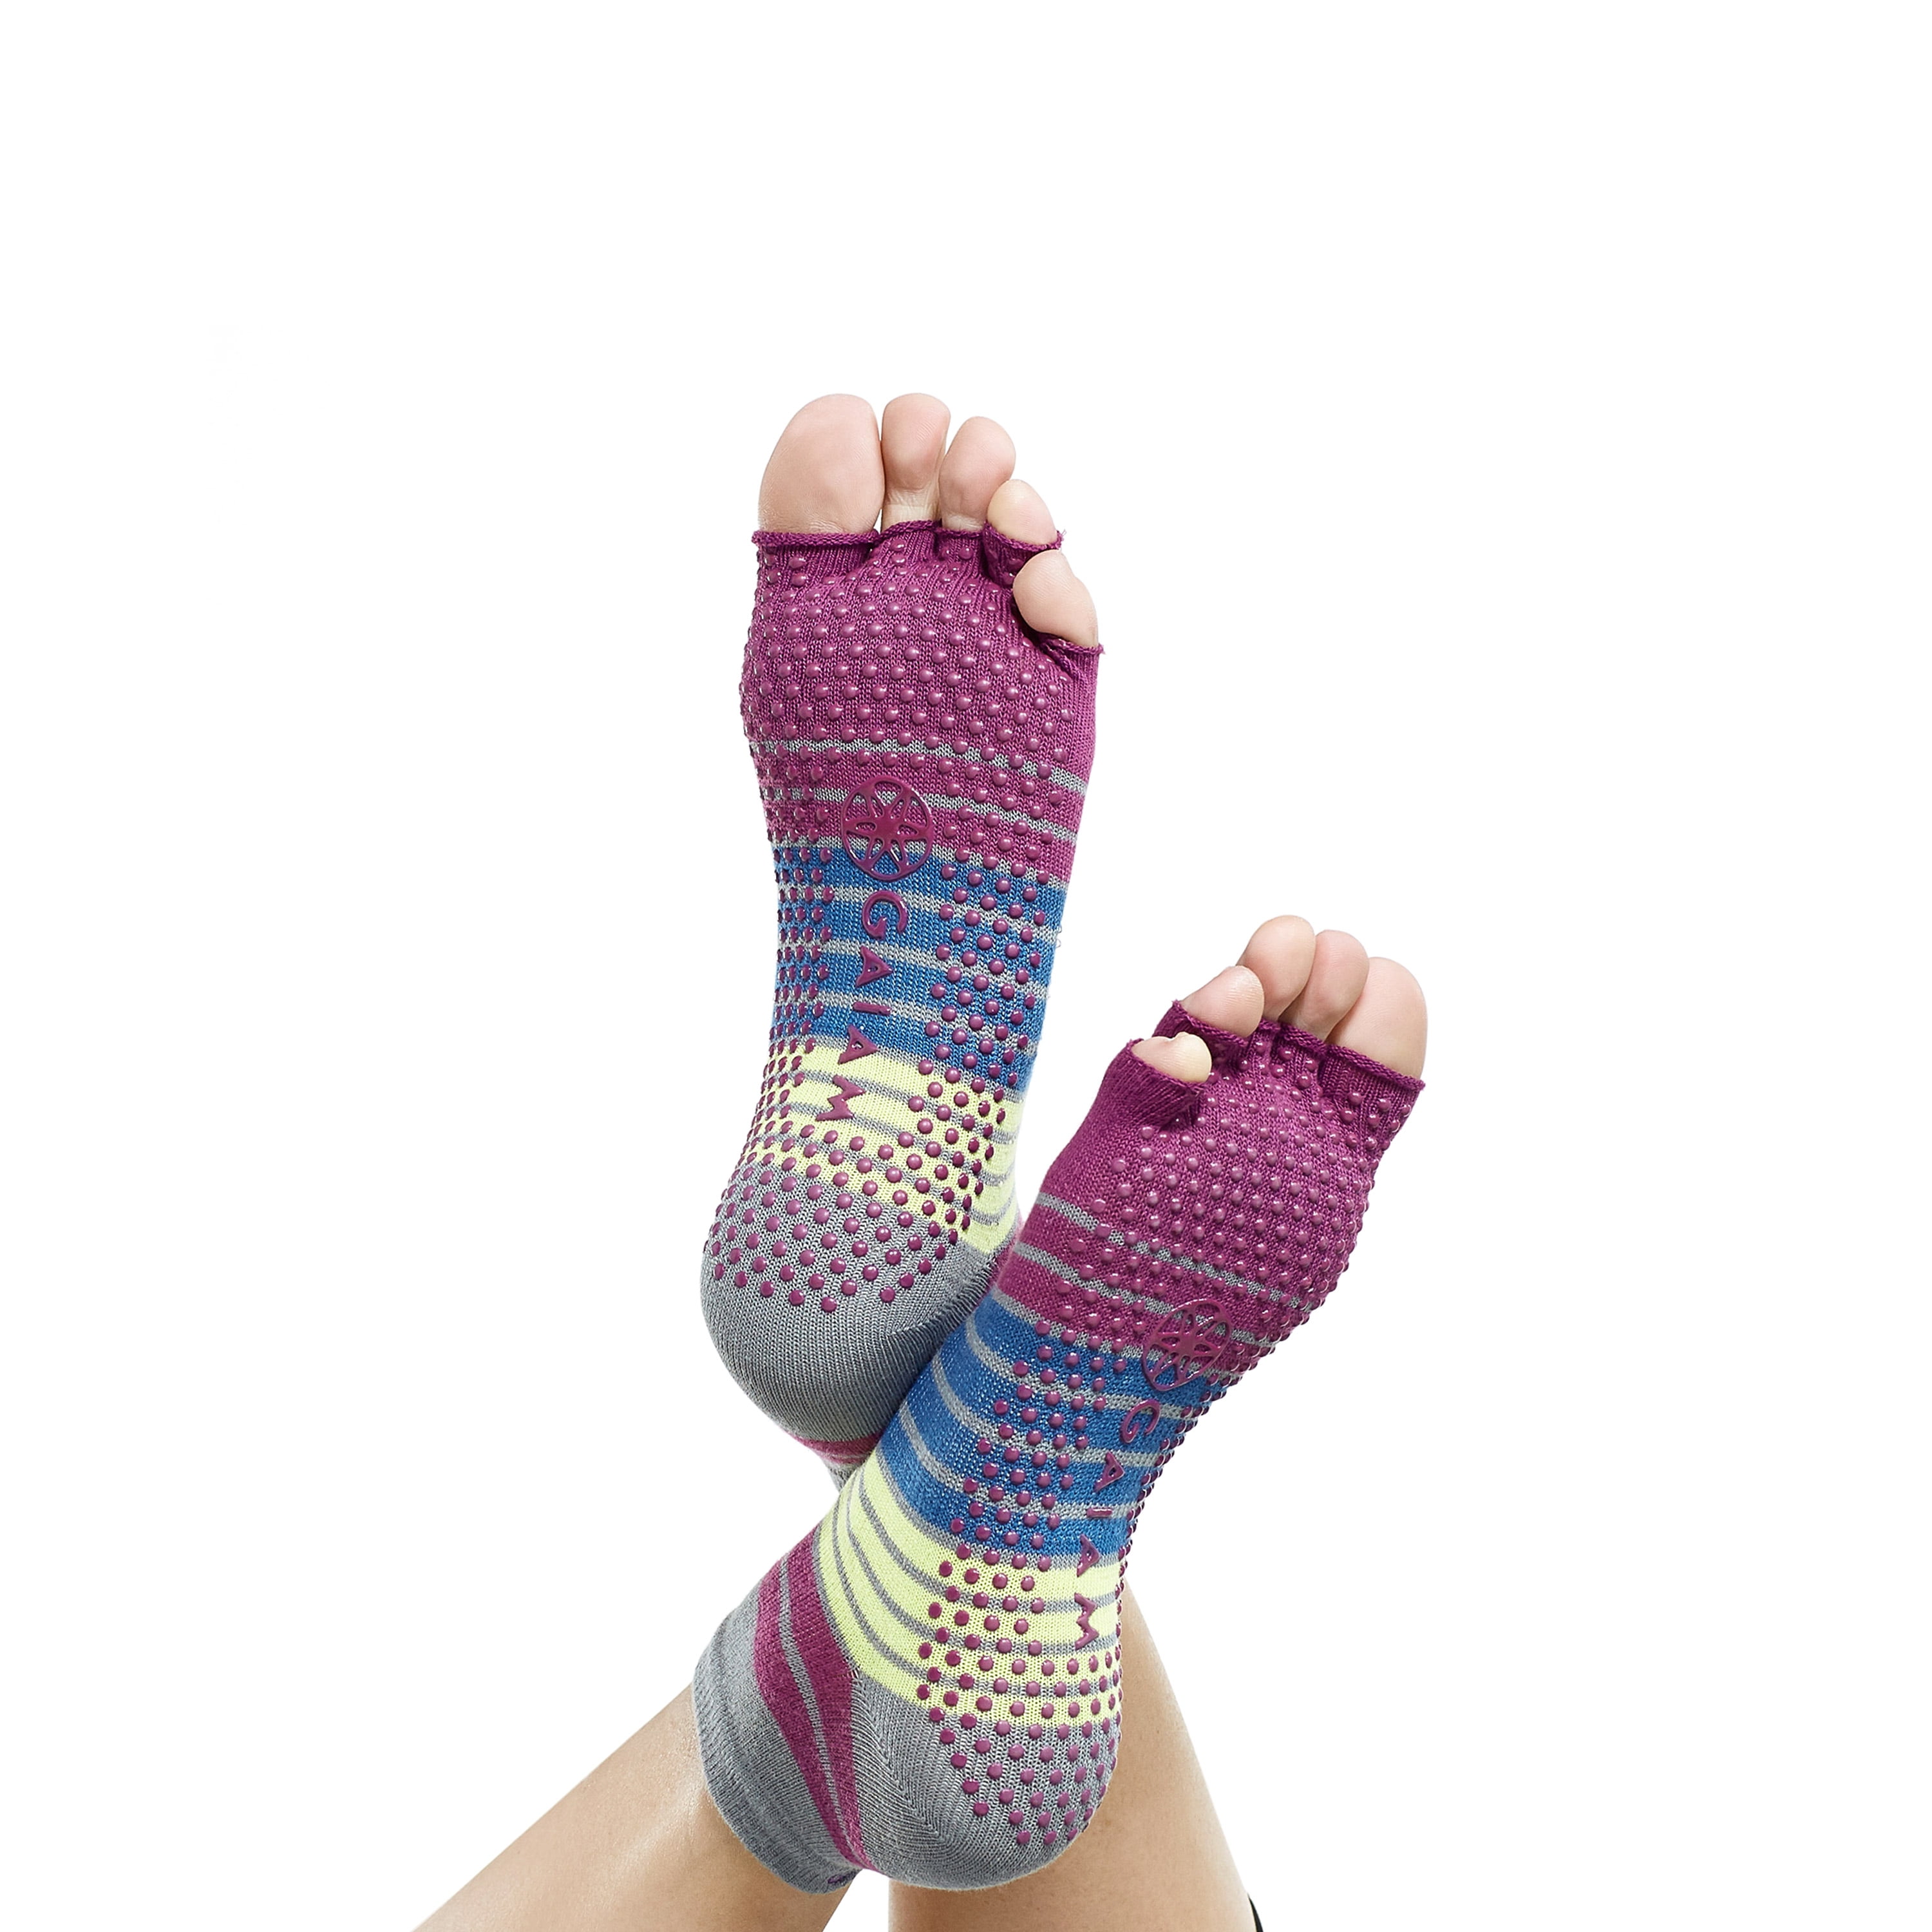 Gaiam Canada - 25% OFF DEAL OF THE DAY! PROMO CODE: SOCKS25  .ca/grippy-lace-up-socks-black Add to your loving collection of yoga gear  with our Gaiam Canada Yoga Socks, and while you are at